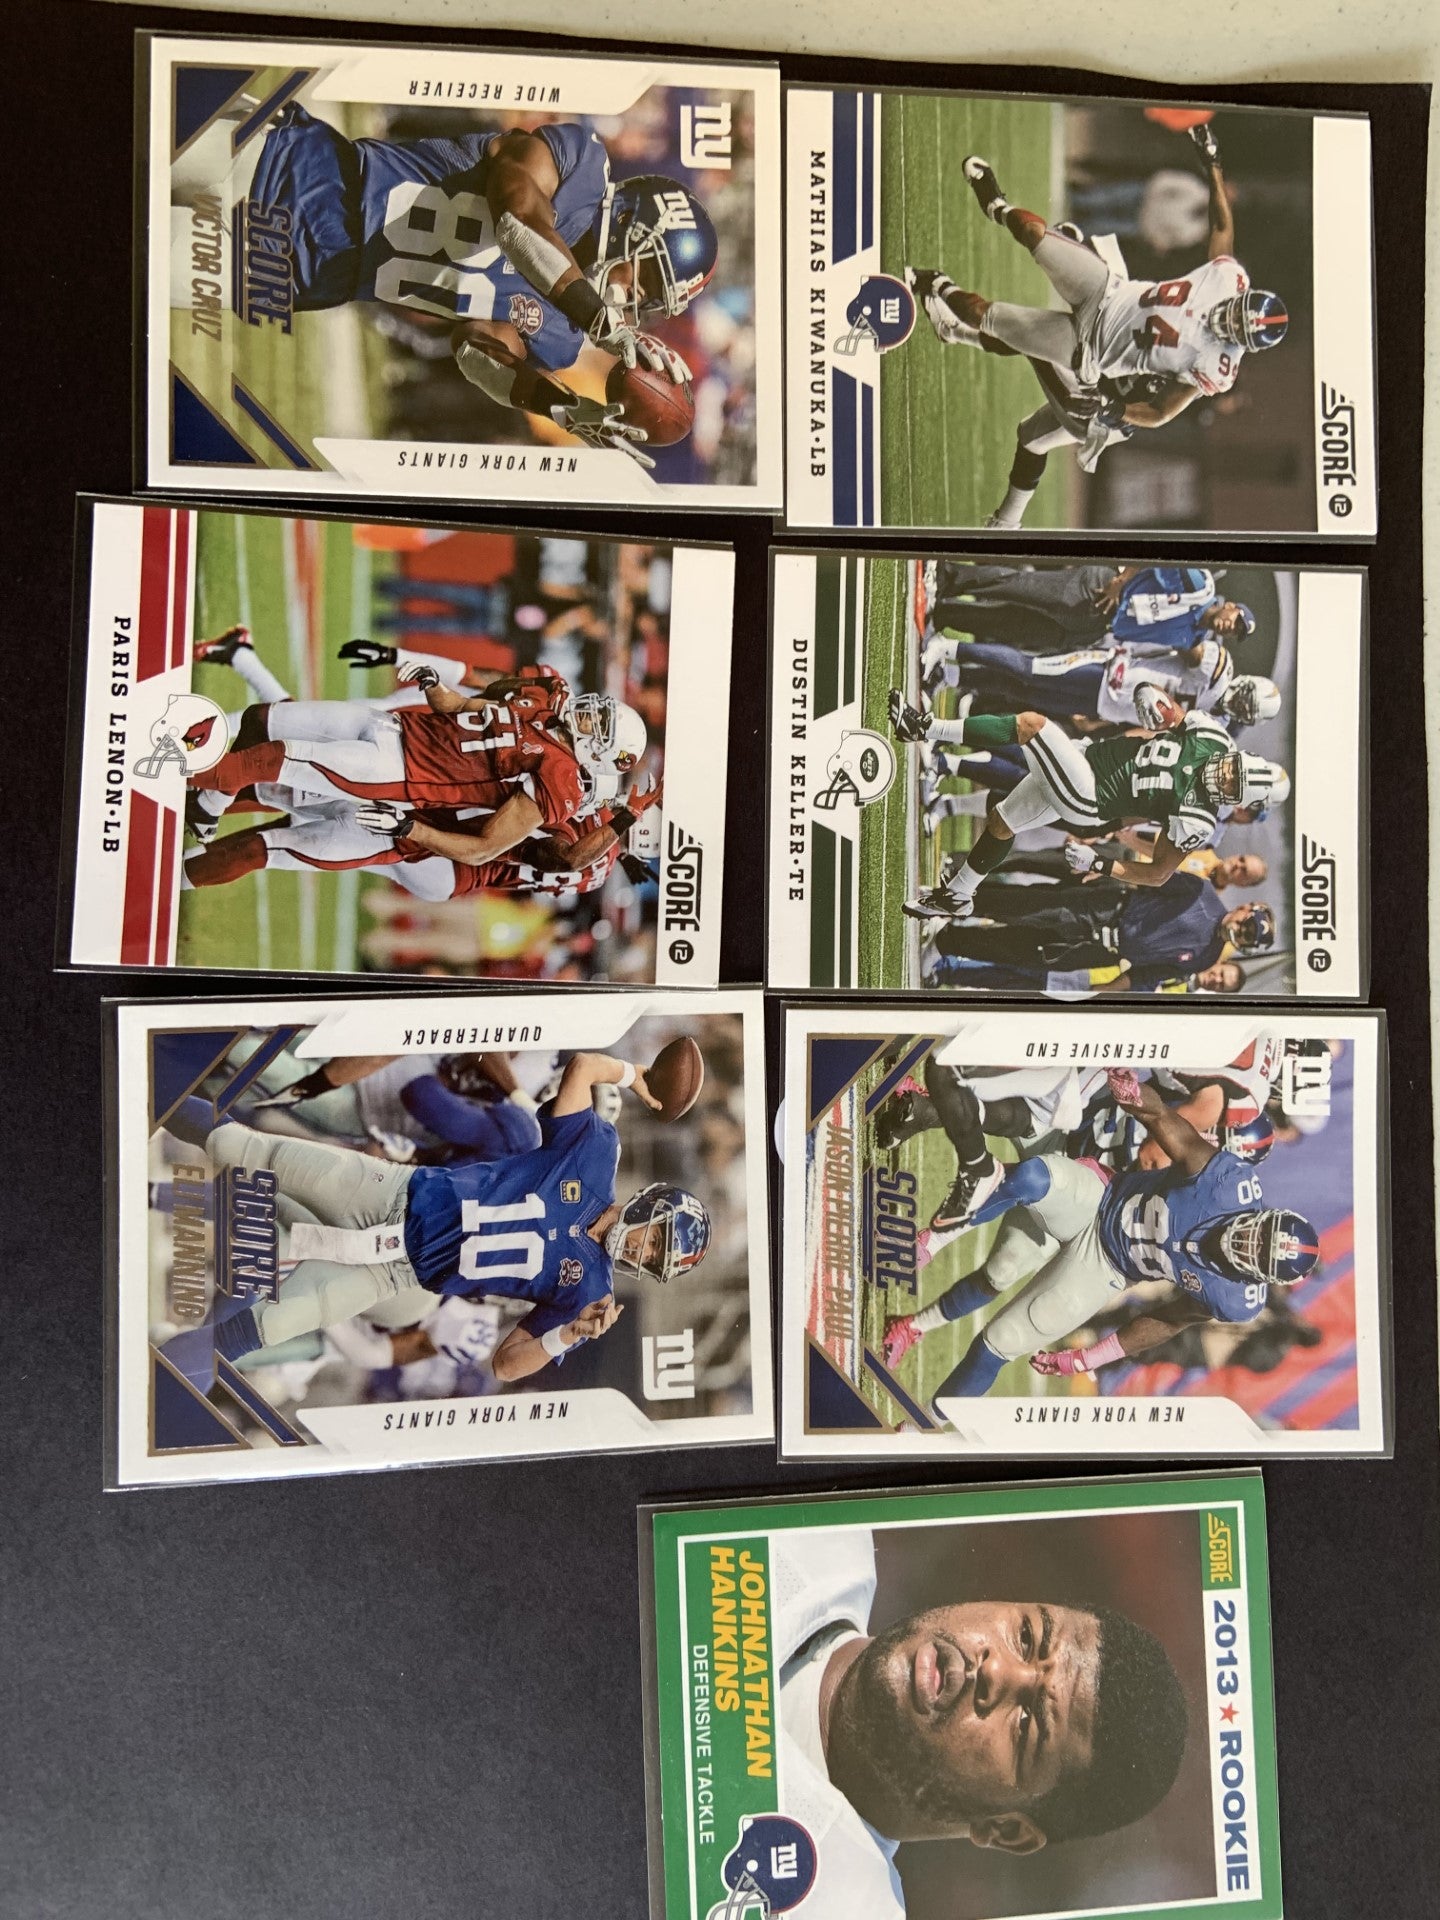 Lot 2 of Mixed Score New York Giants 7 Cards